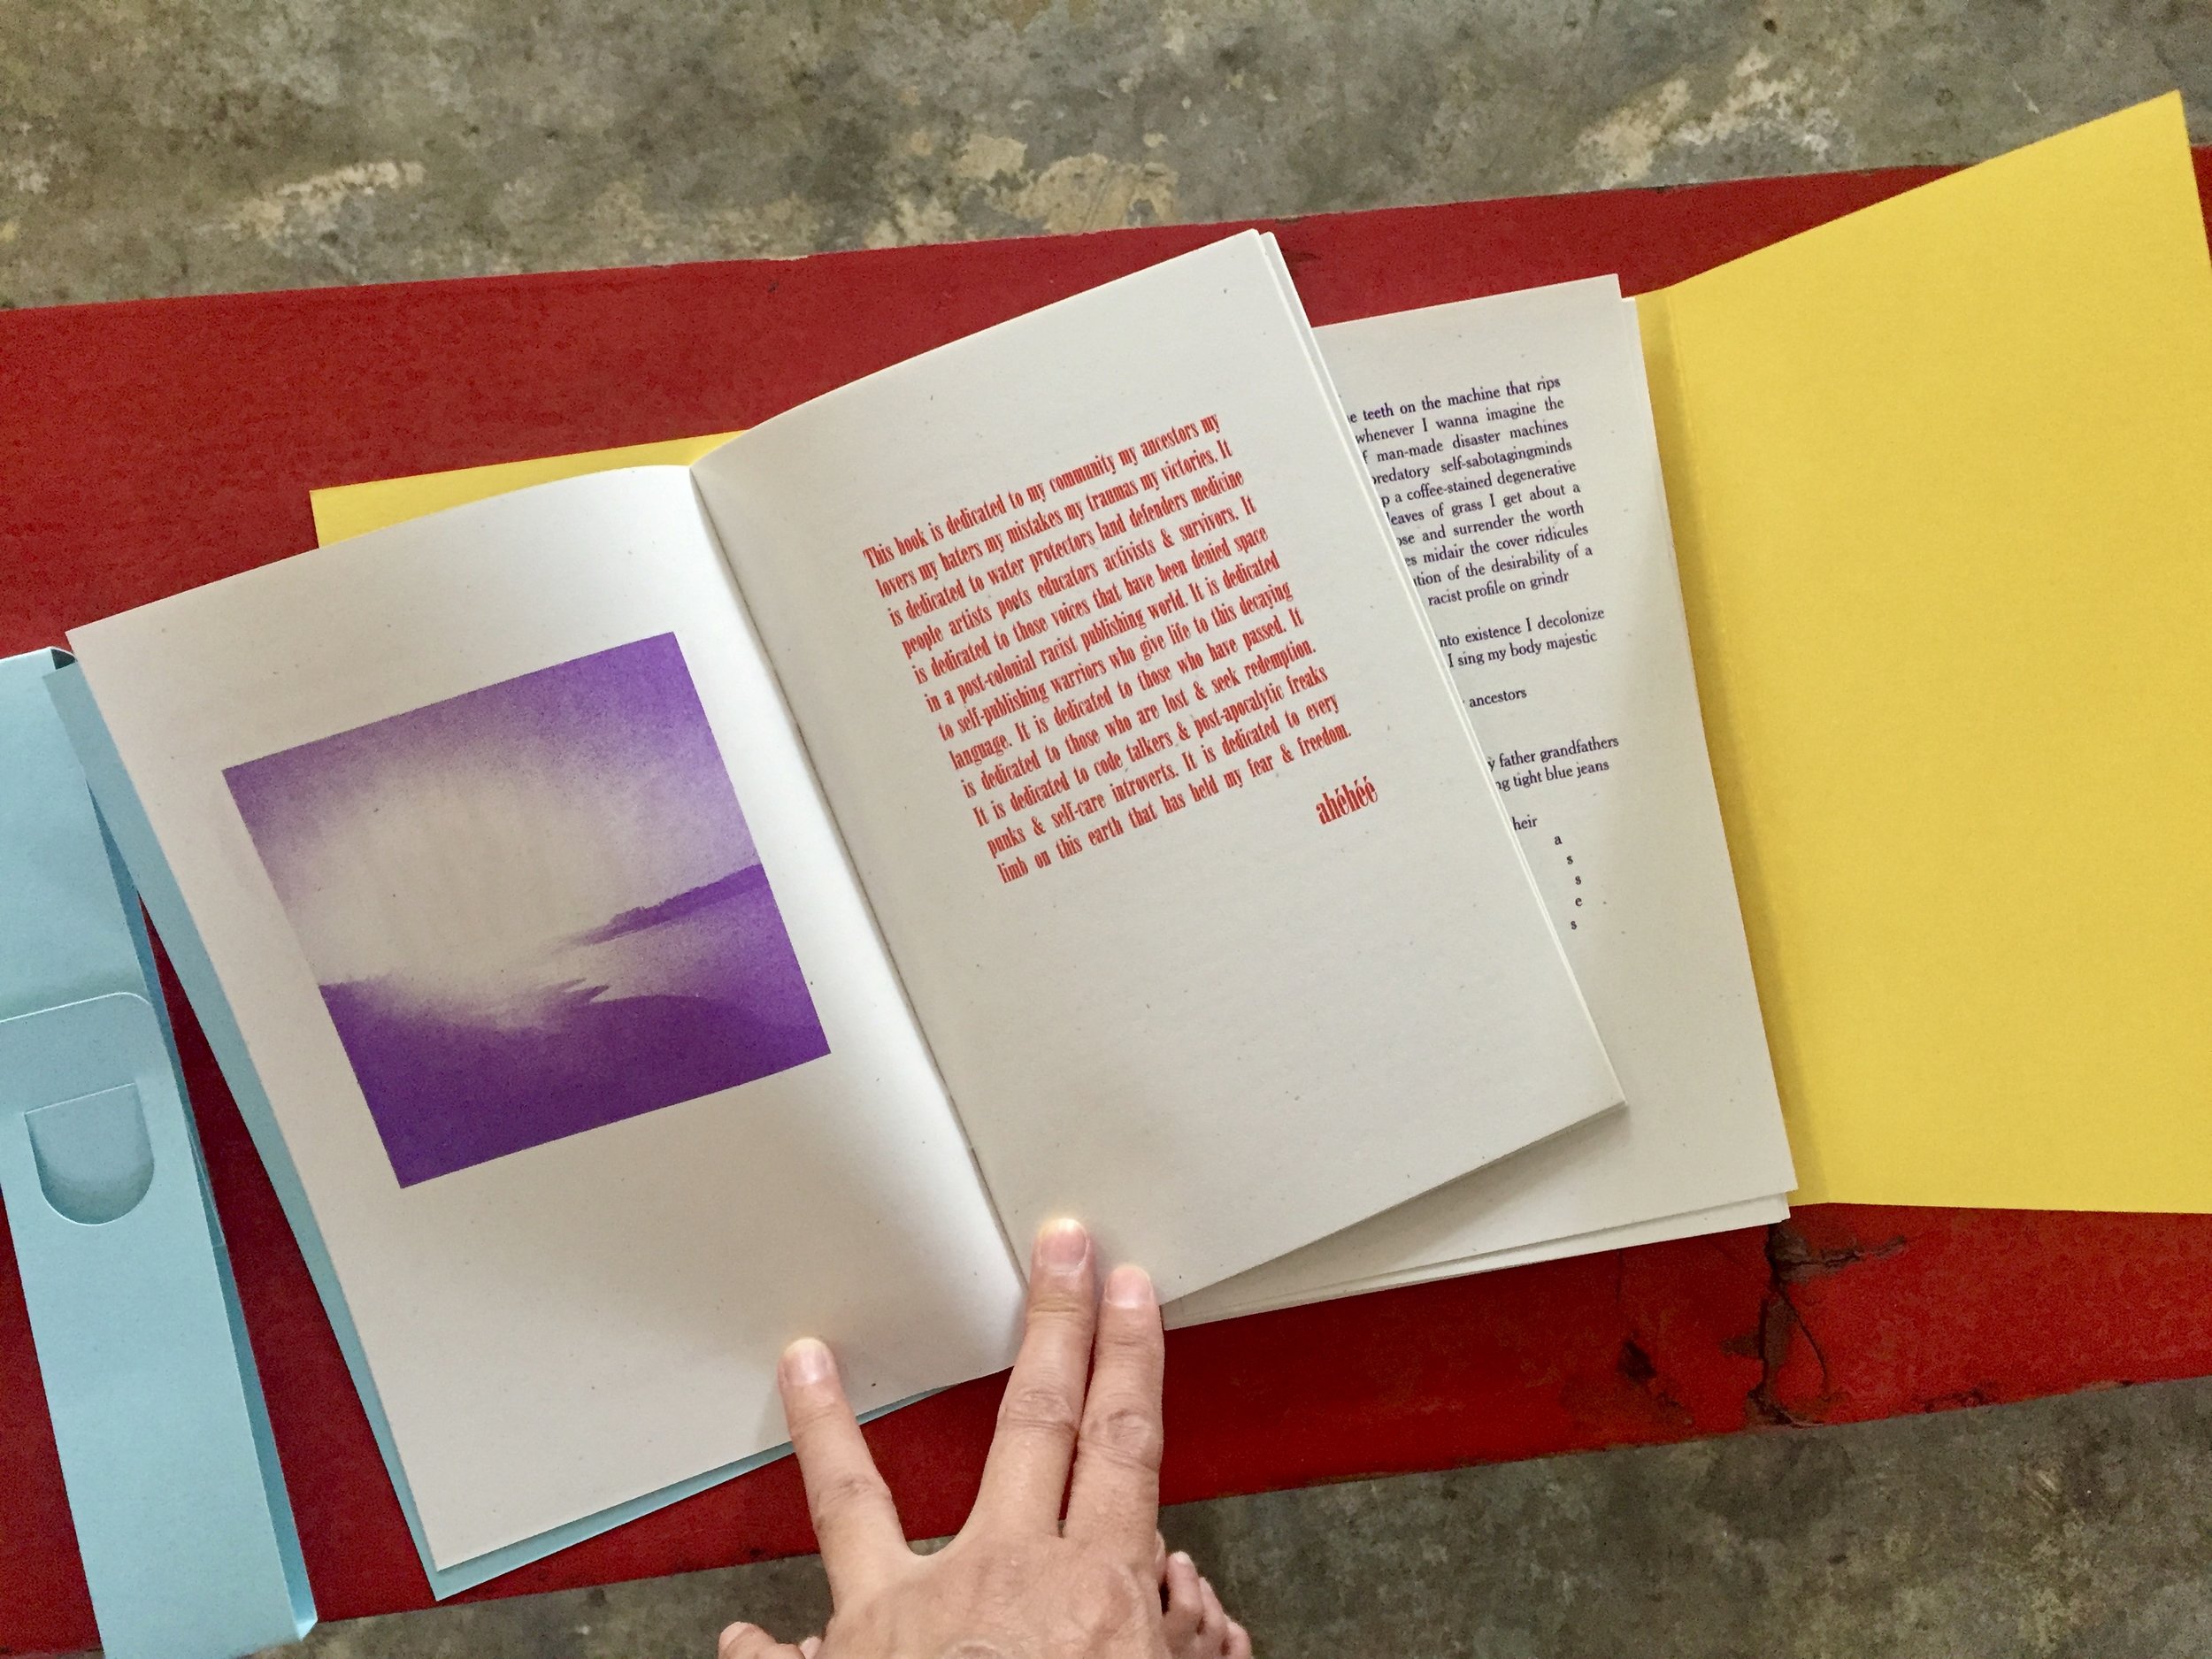  DinéYazhi´’s book consists of loose leafs and hand-bound elements, printed/assembled by John Akira Harrold. 